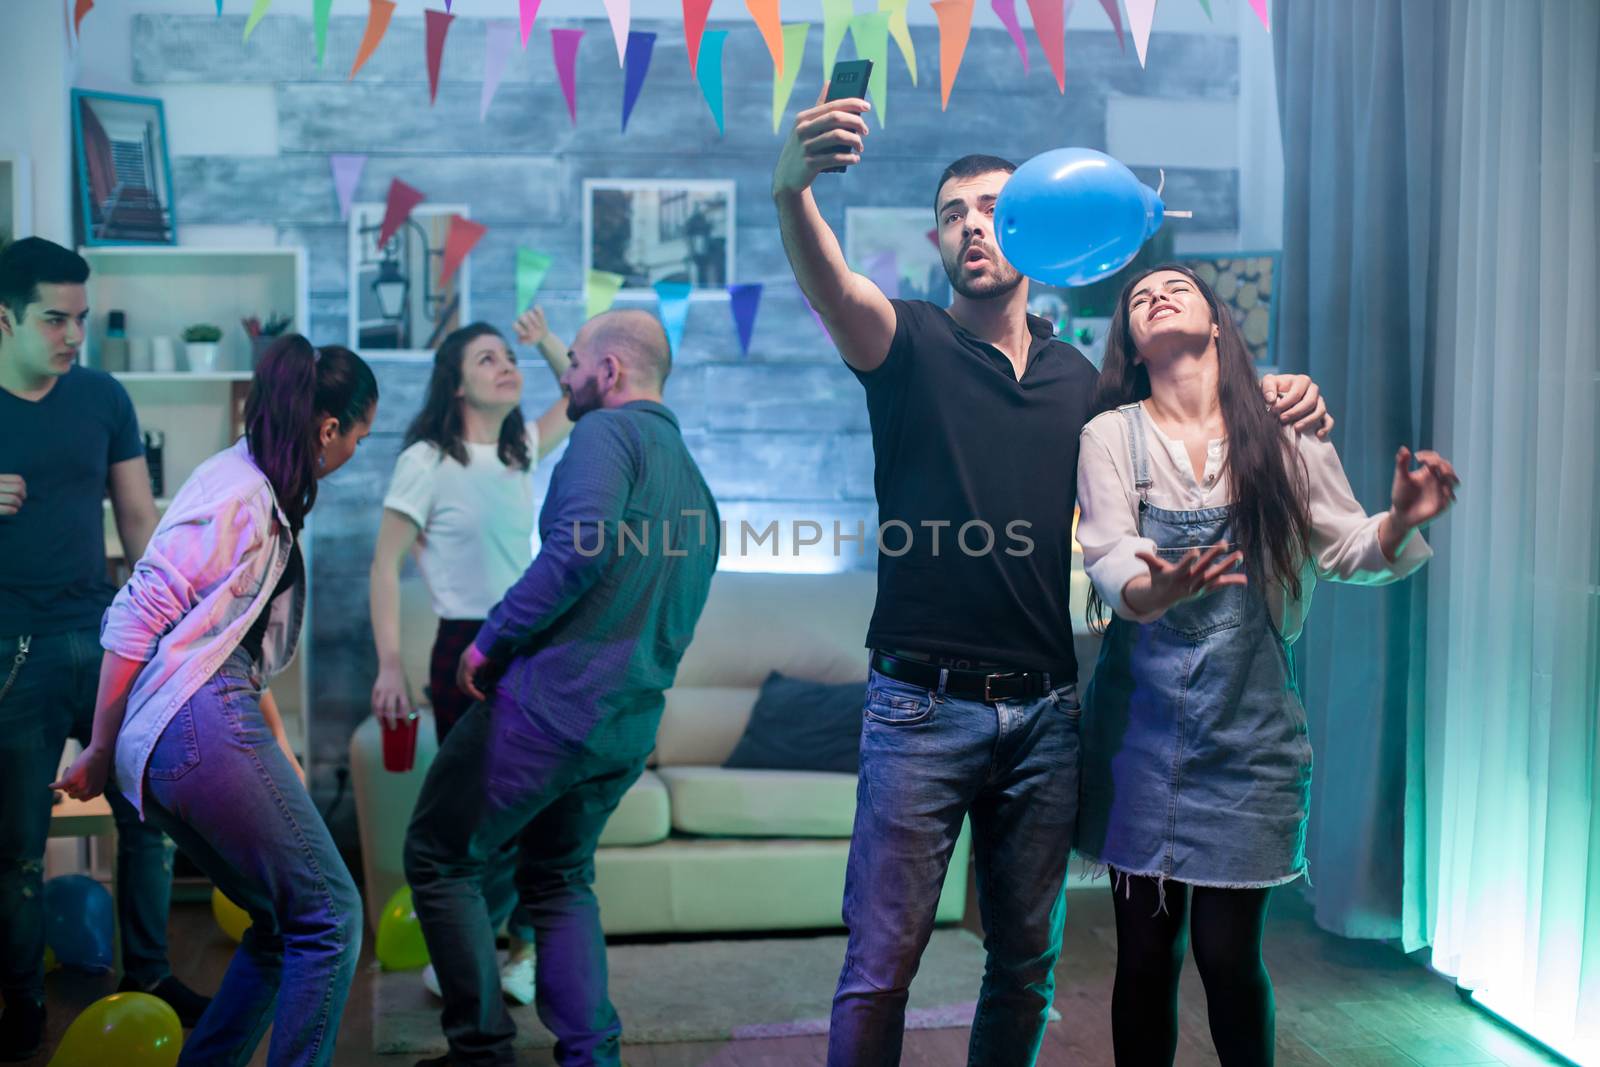 Smiling man and woman taking a selfie while having fun at a party.